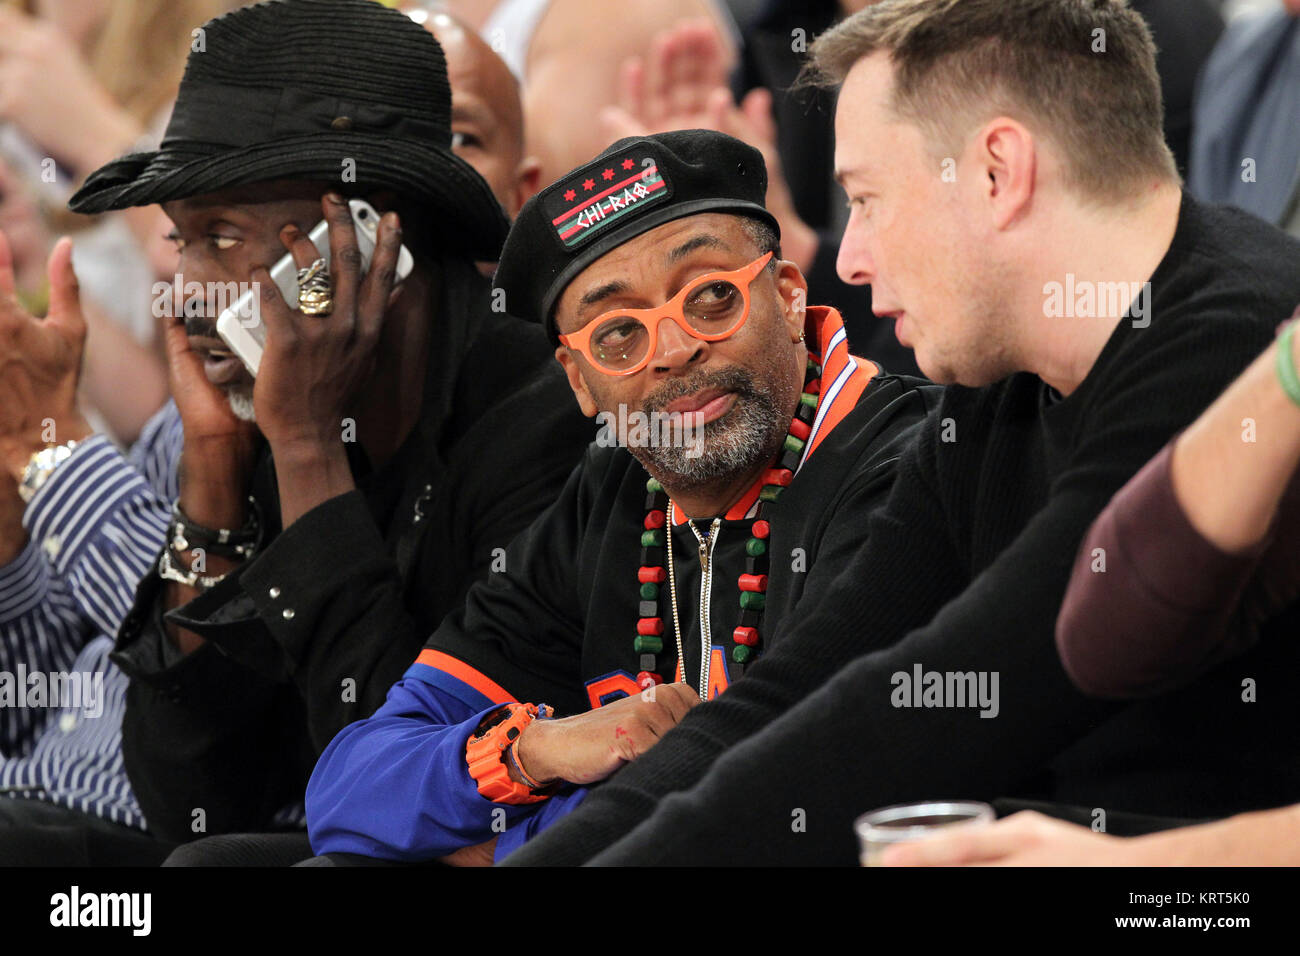 NEW YORK, NY - NOVEMBER 08: (Embargoed till November 10, 2015) Magic Johnson, Tracy Morgan with wife Megan Wollover sit with Michael K. Williams and  Director Spike Lee at the New York Knicks vs Los Angeles Lakers game at Madison Square Garden on November 8, 2015 in New York City.   People:  Michael K. Williams, Spike Lee Stock Photo